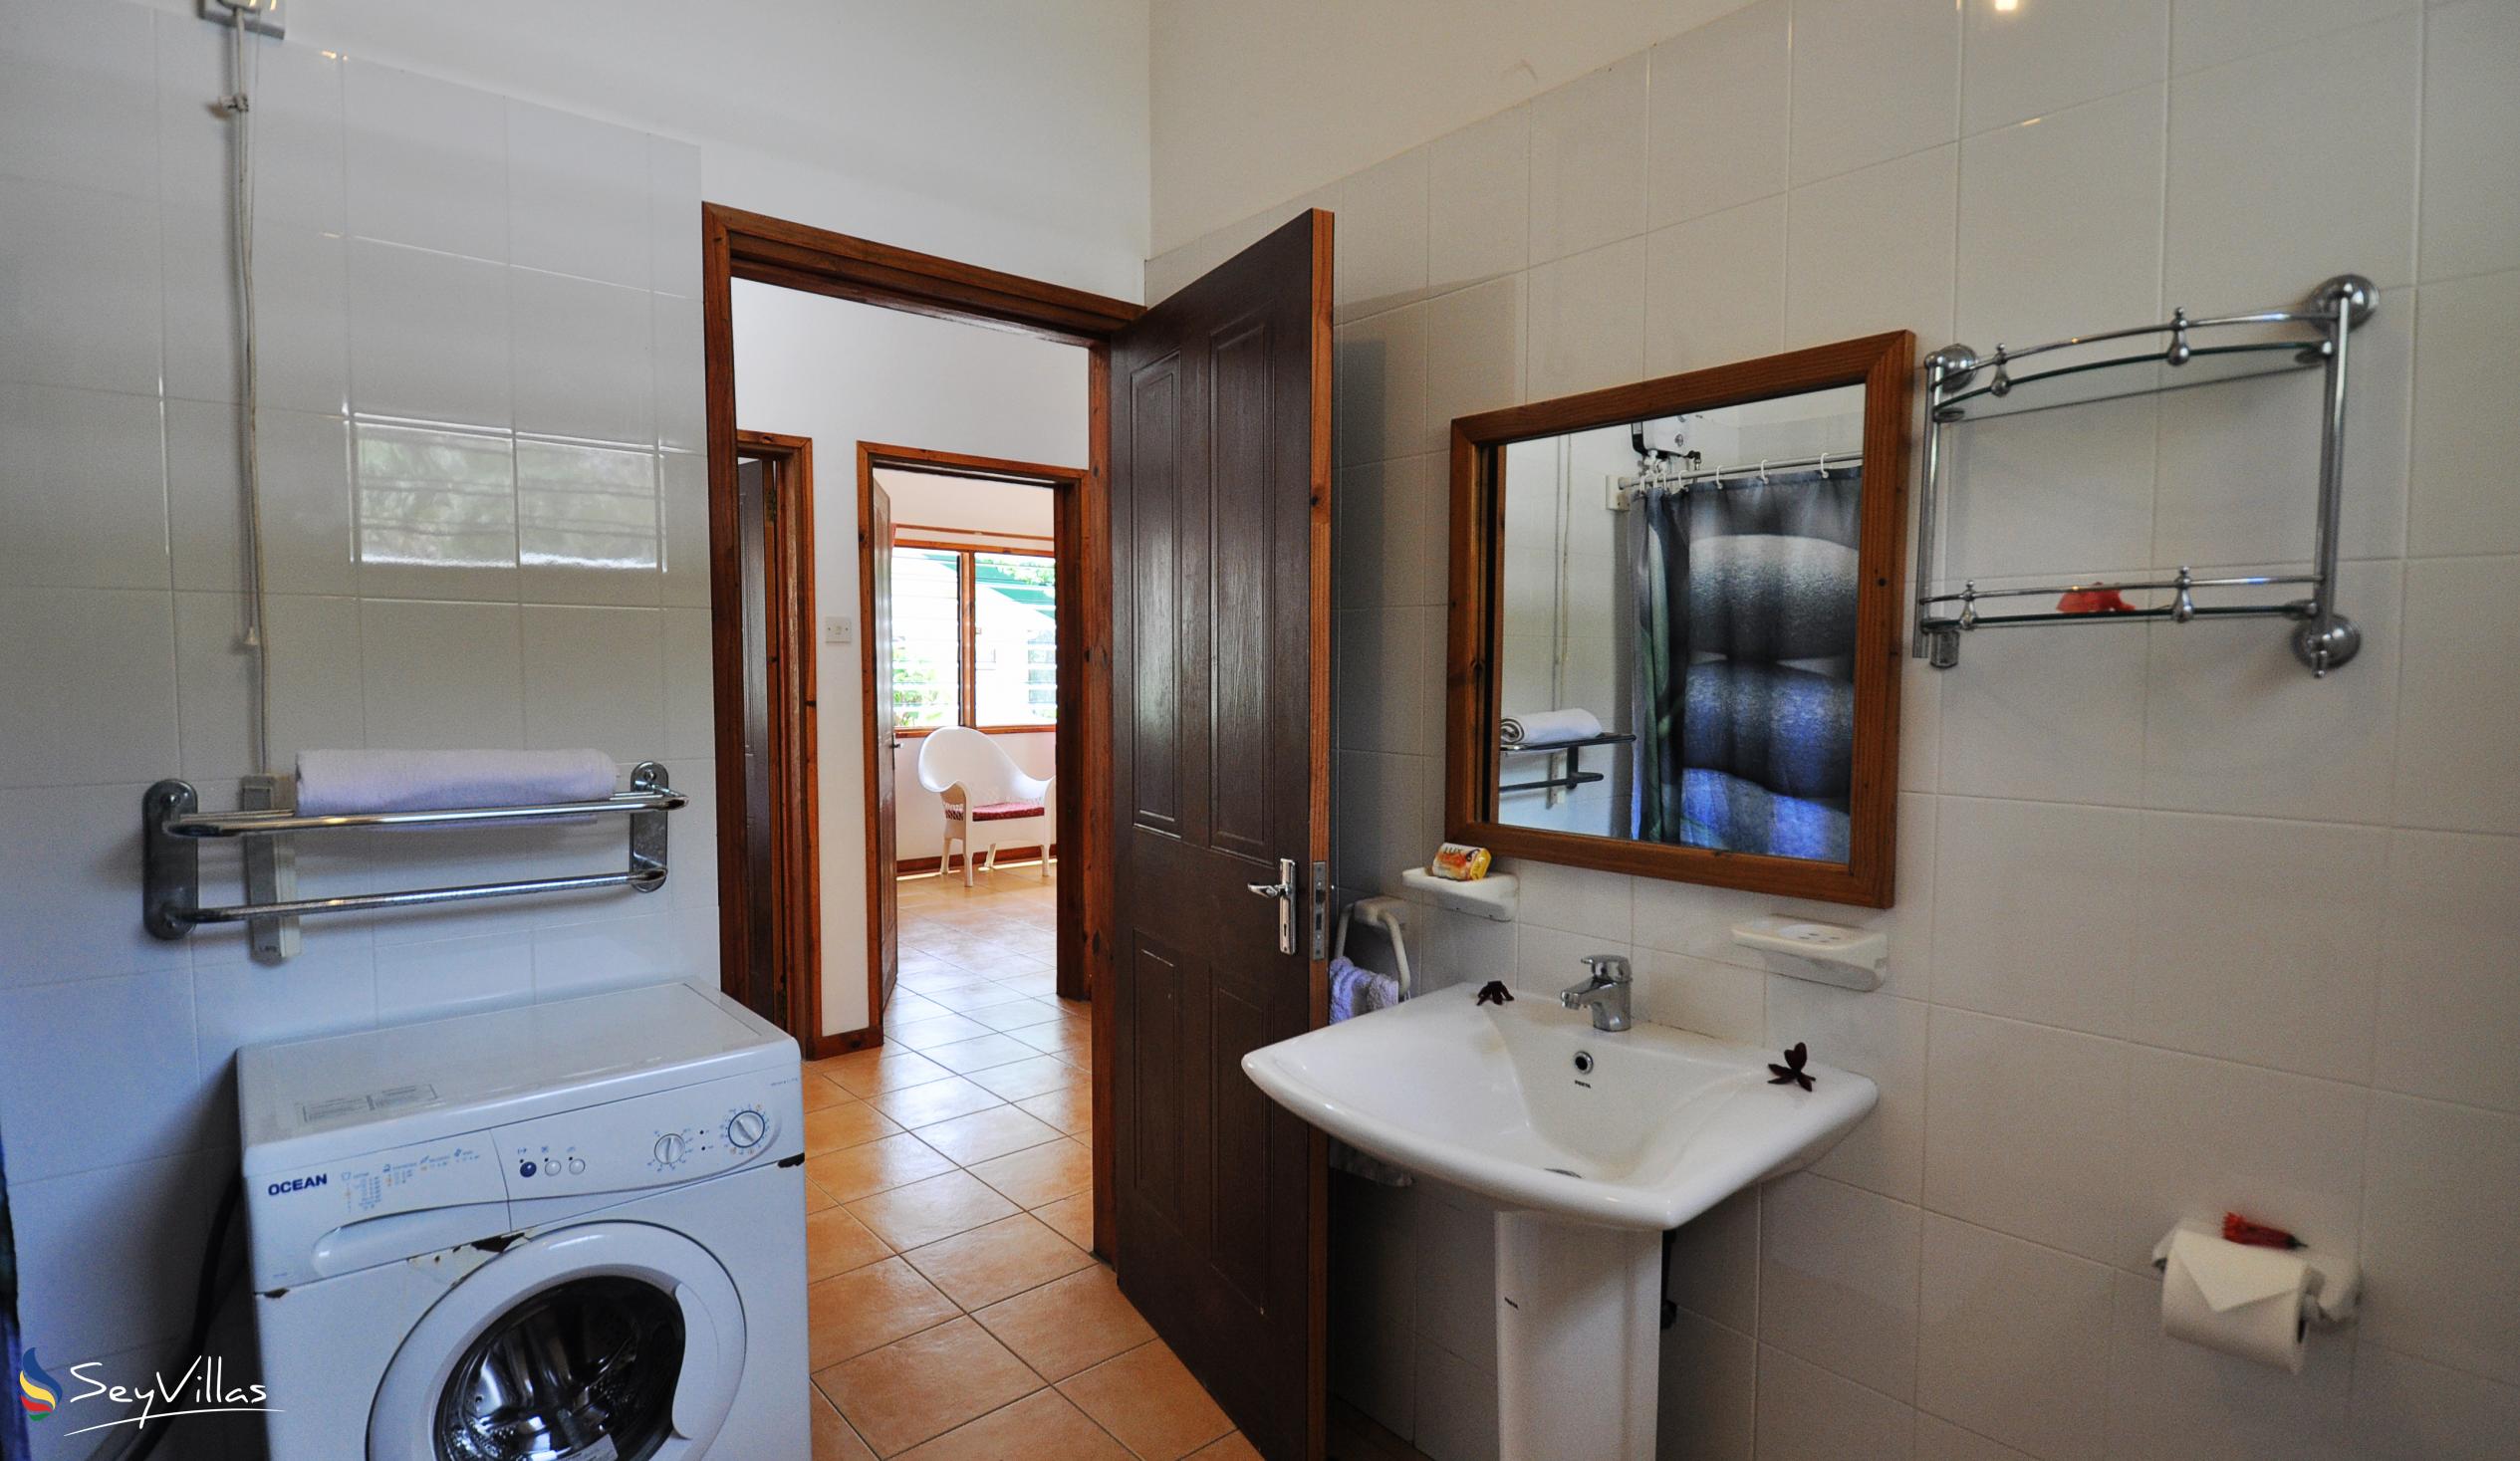 Foto 20: GT Selfcatering Apartments - Appartement - Mahé (Seychelles)